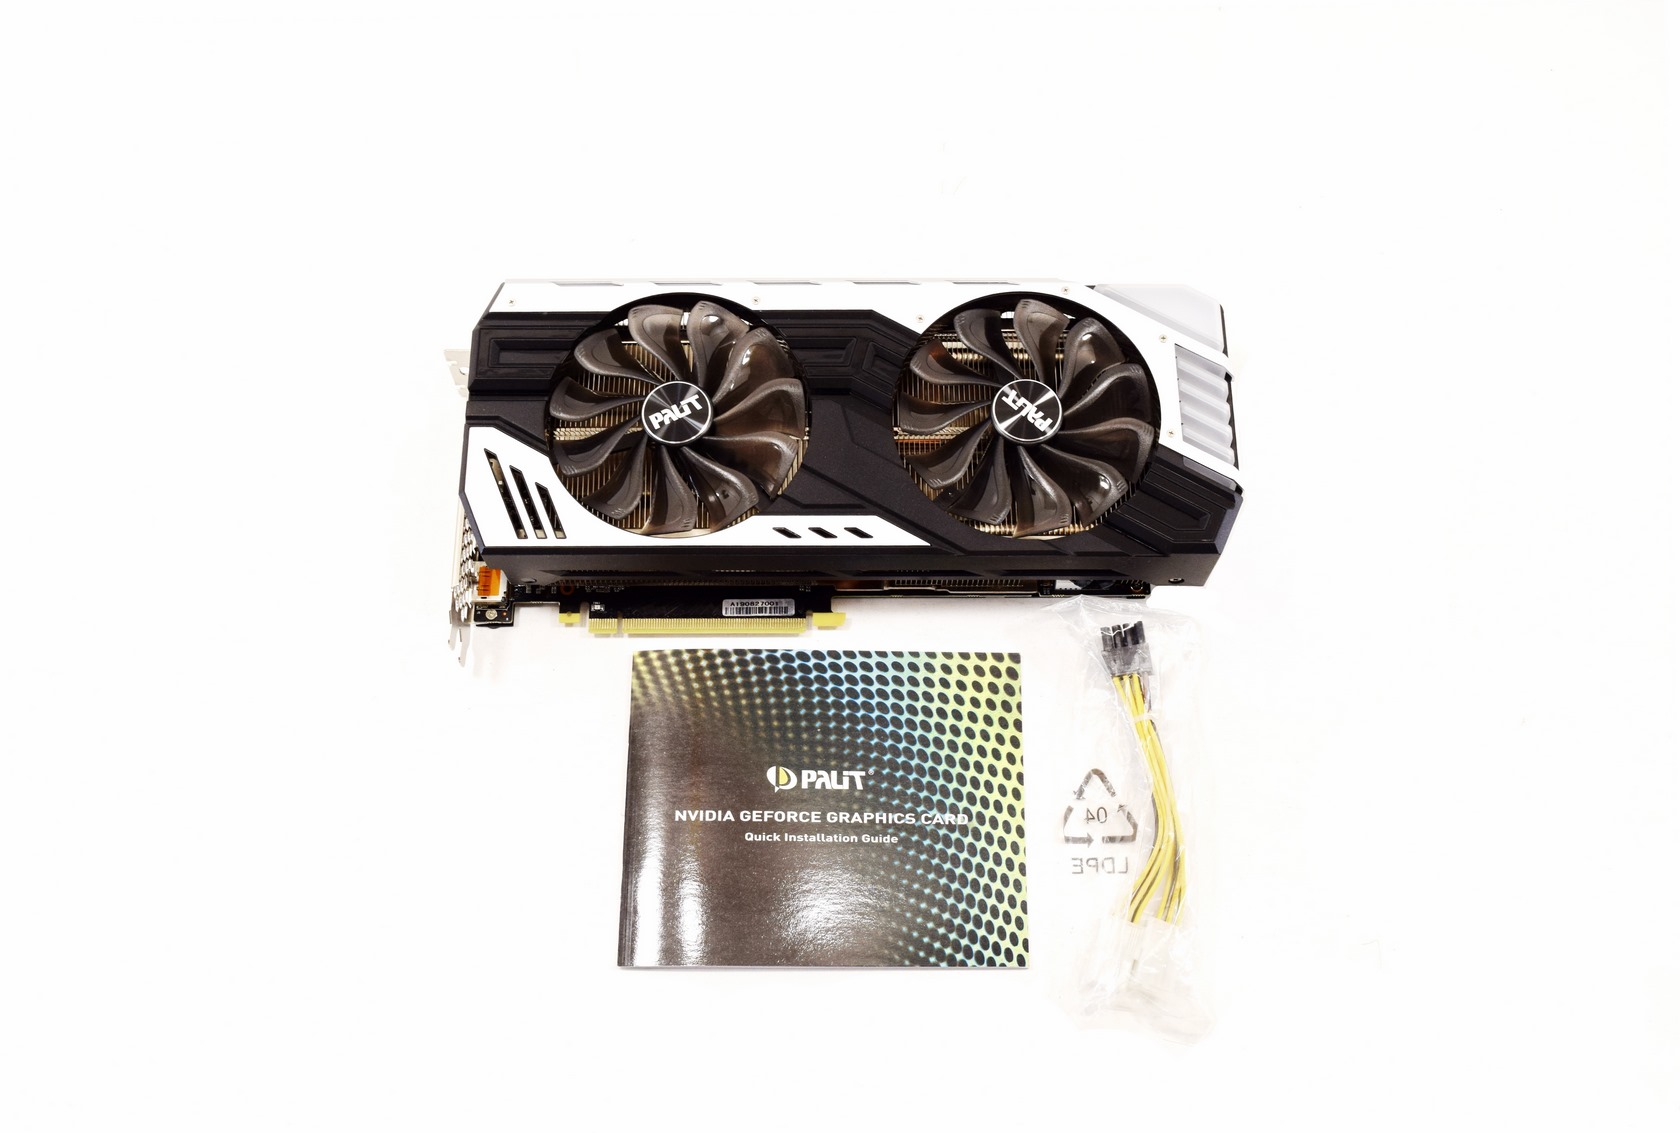 Palit GeForce RTX 2070 Super JetStream Graphics Card Review